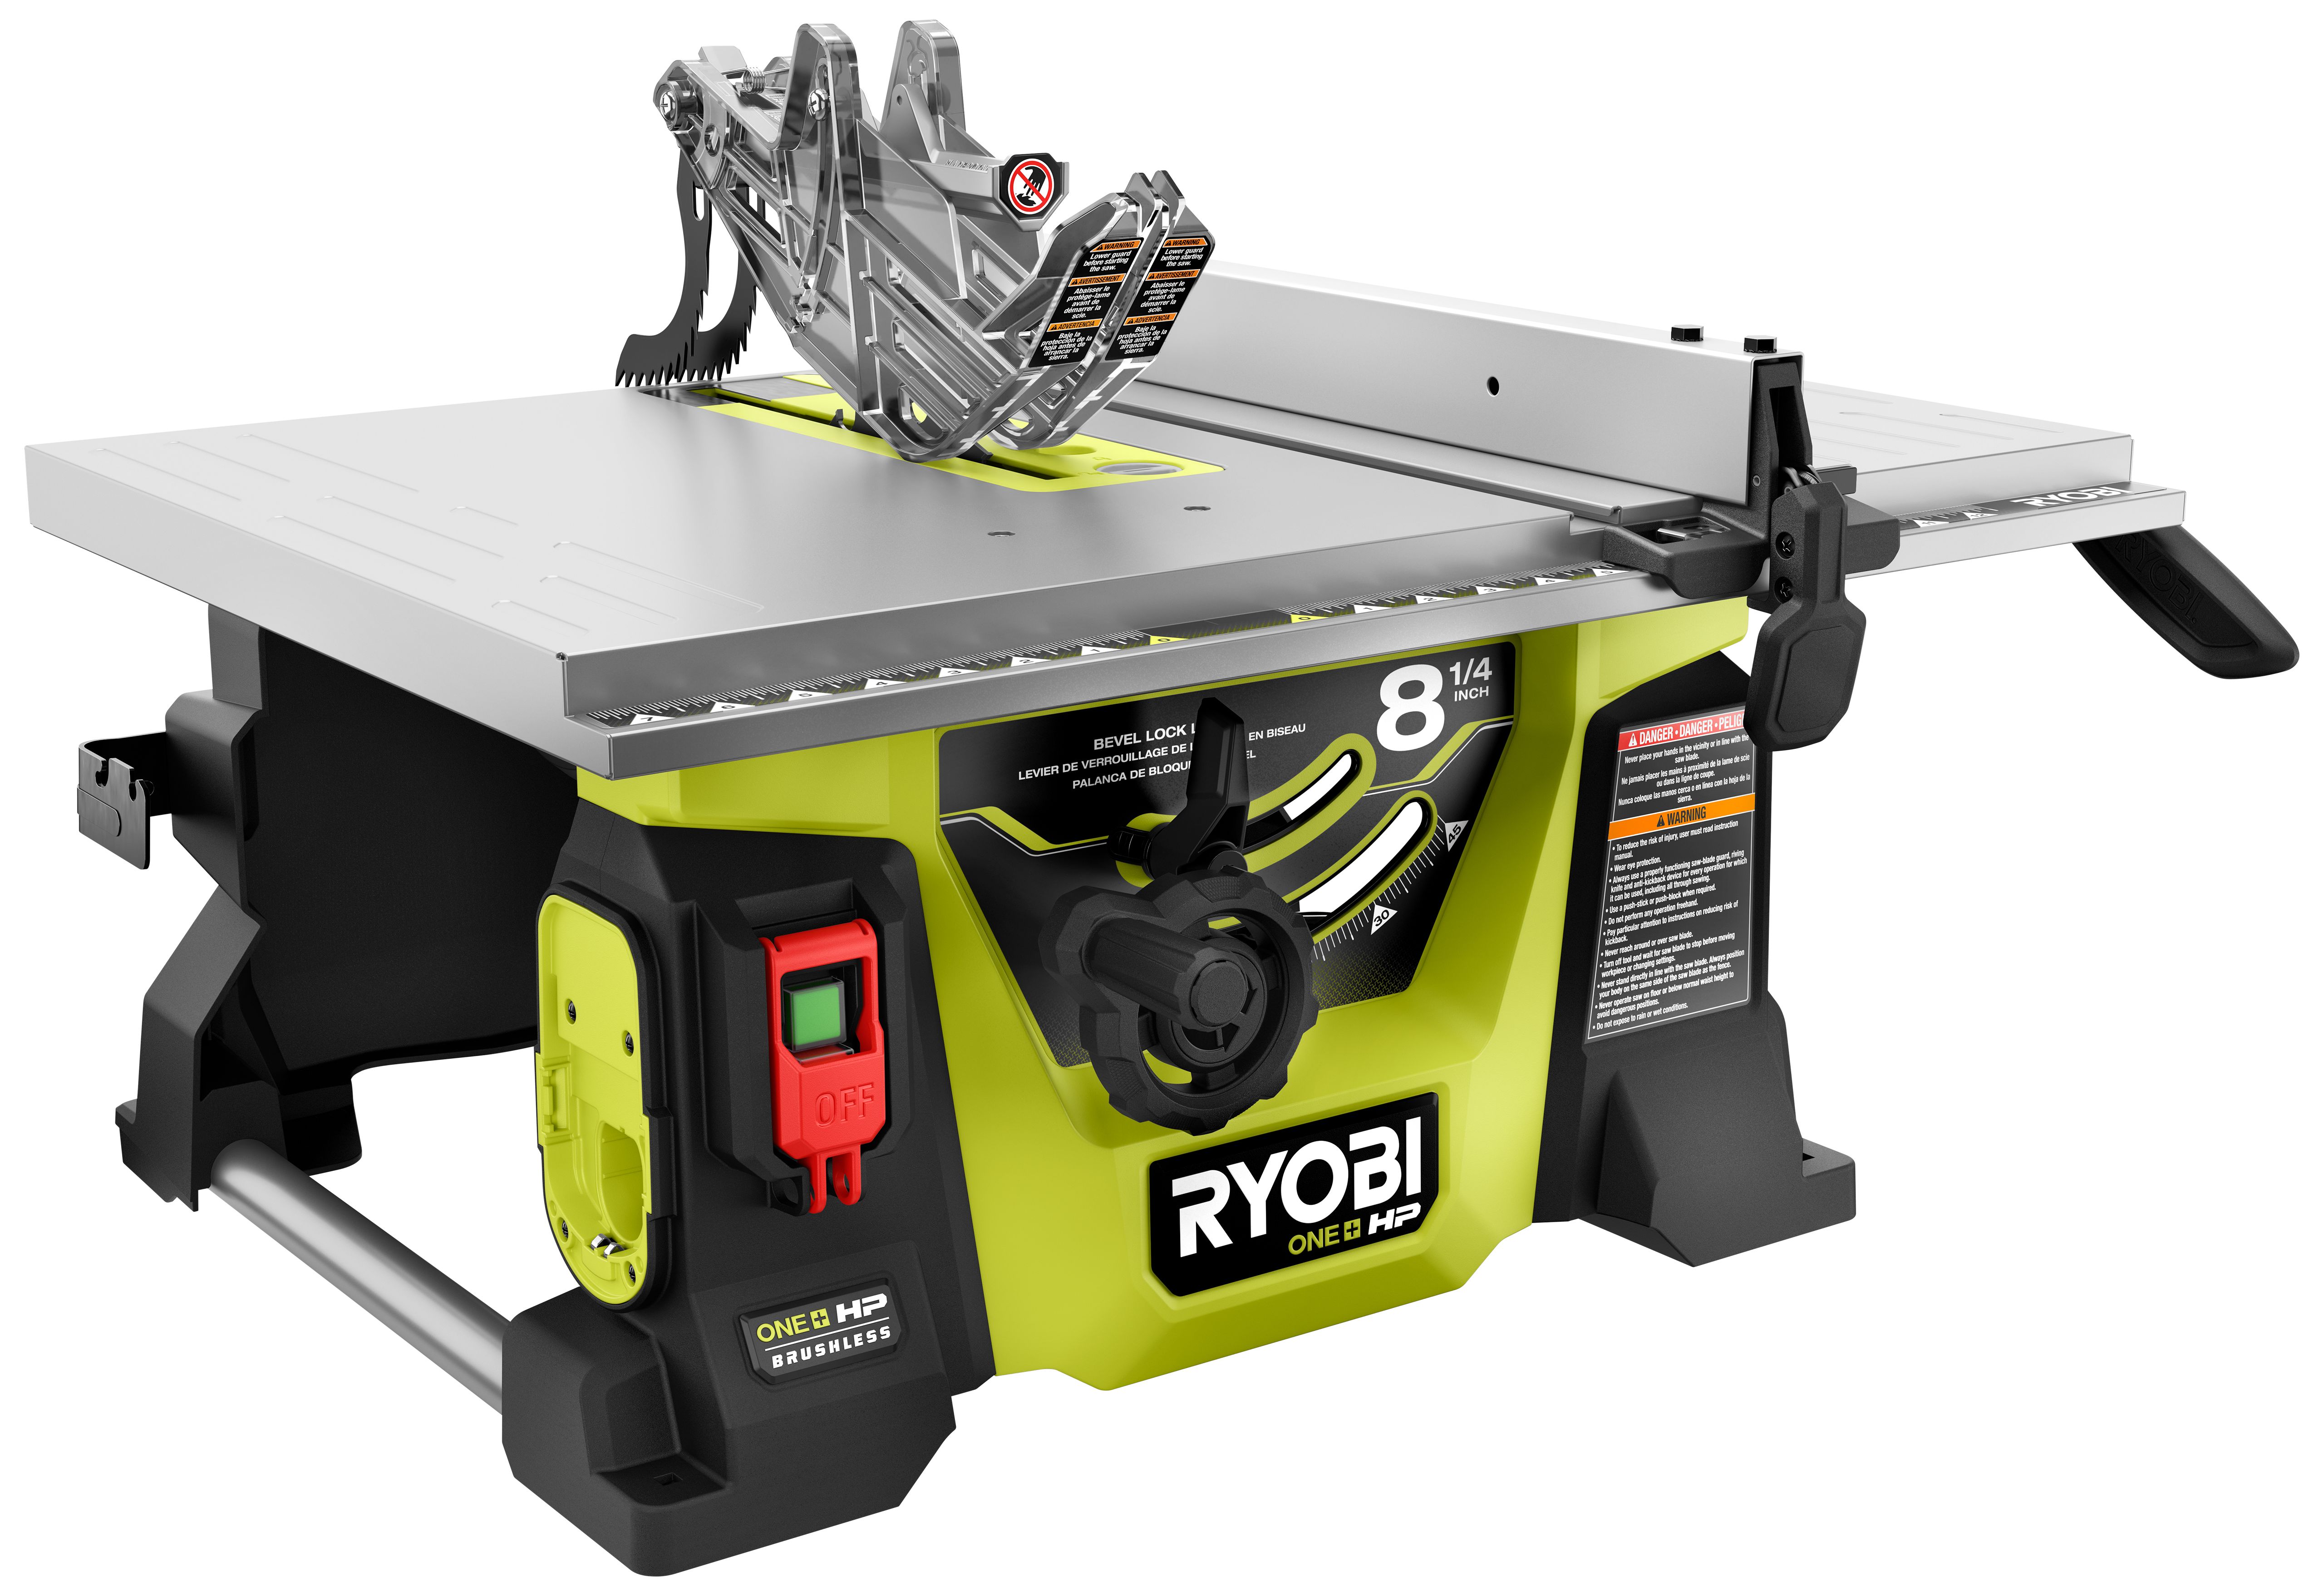 10 Things to Know about your Table Saw